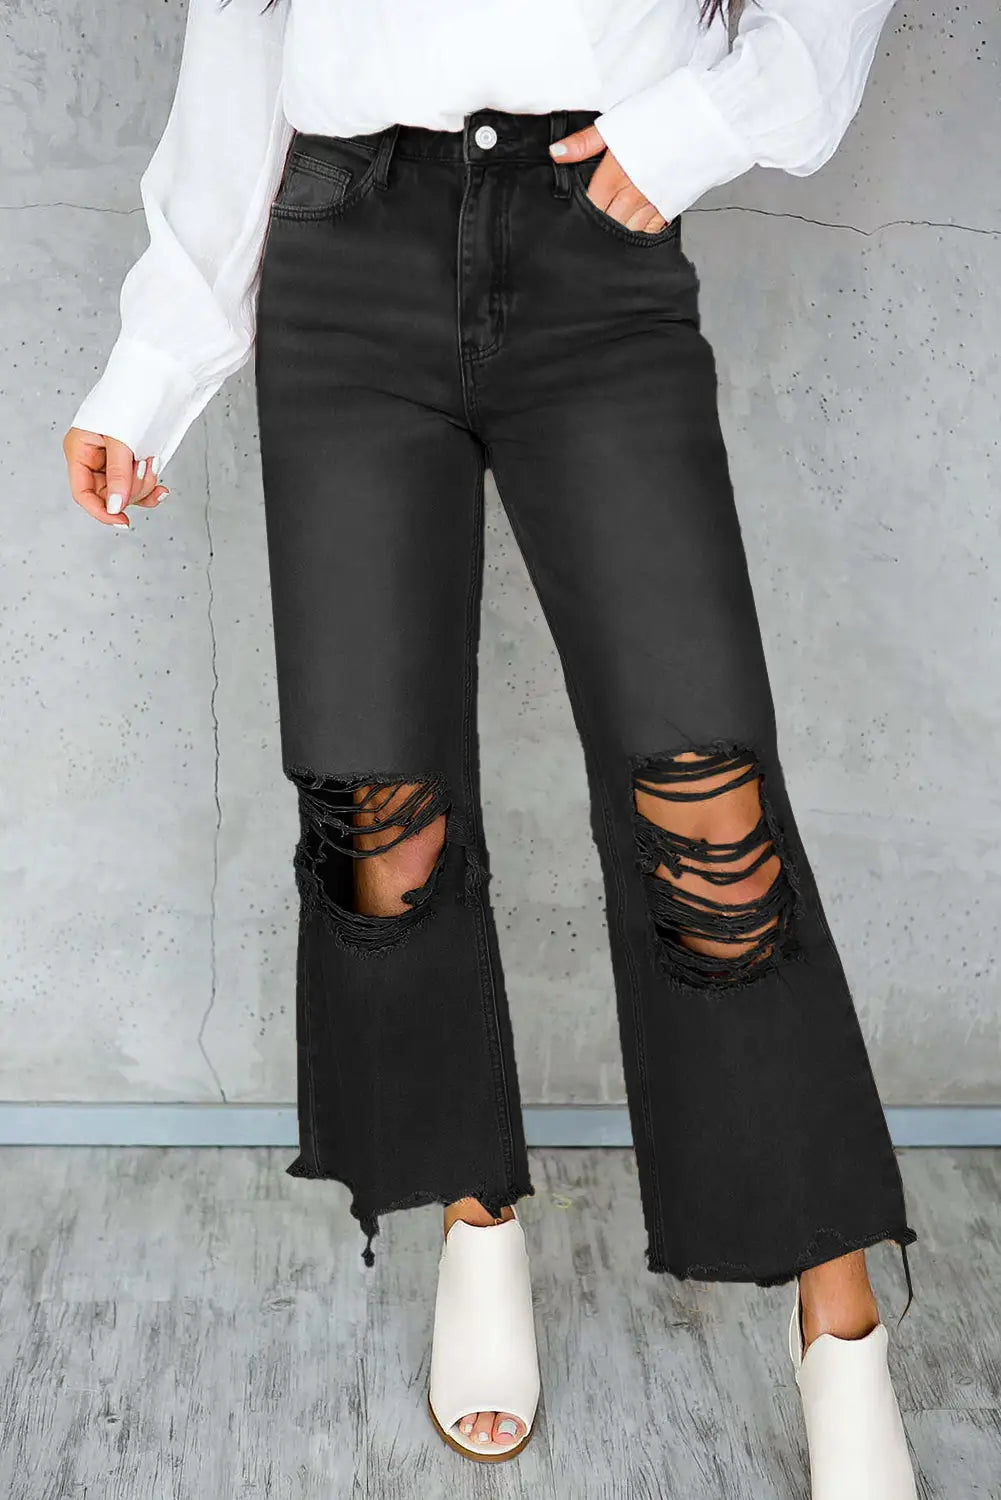 Black distressed hollow - out high waist cropped flare jeans - 10 100% cotton